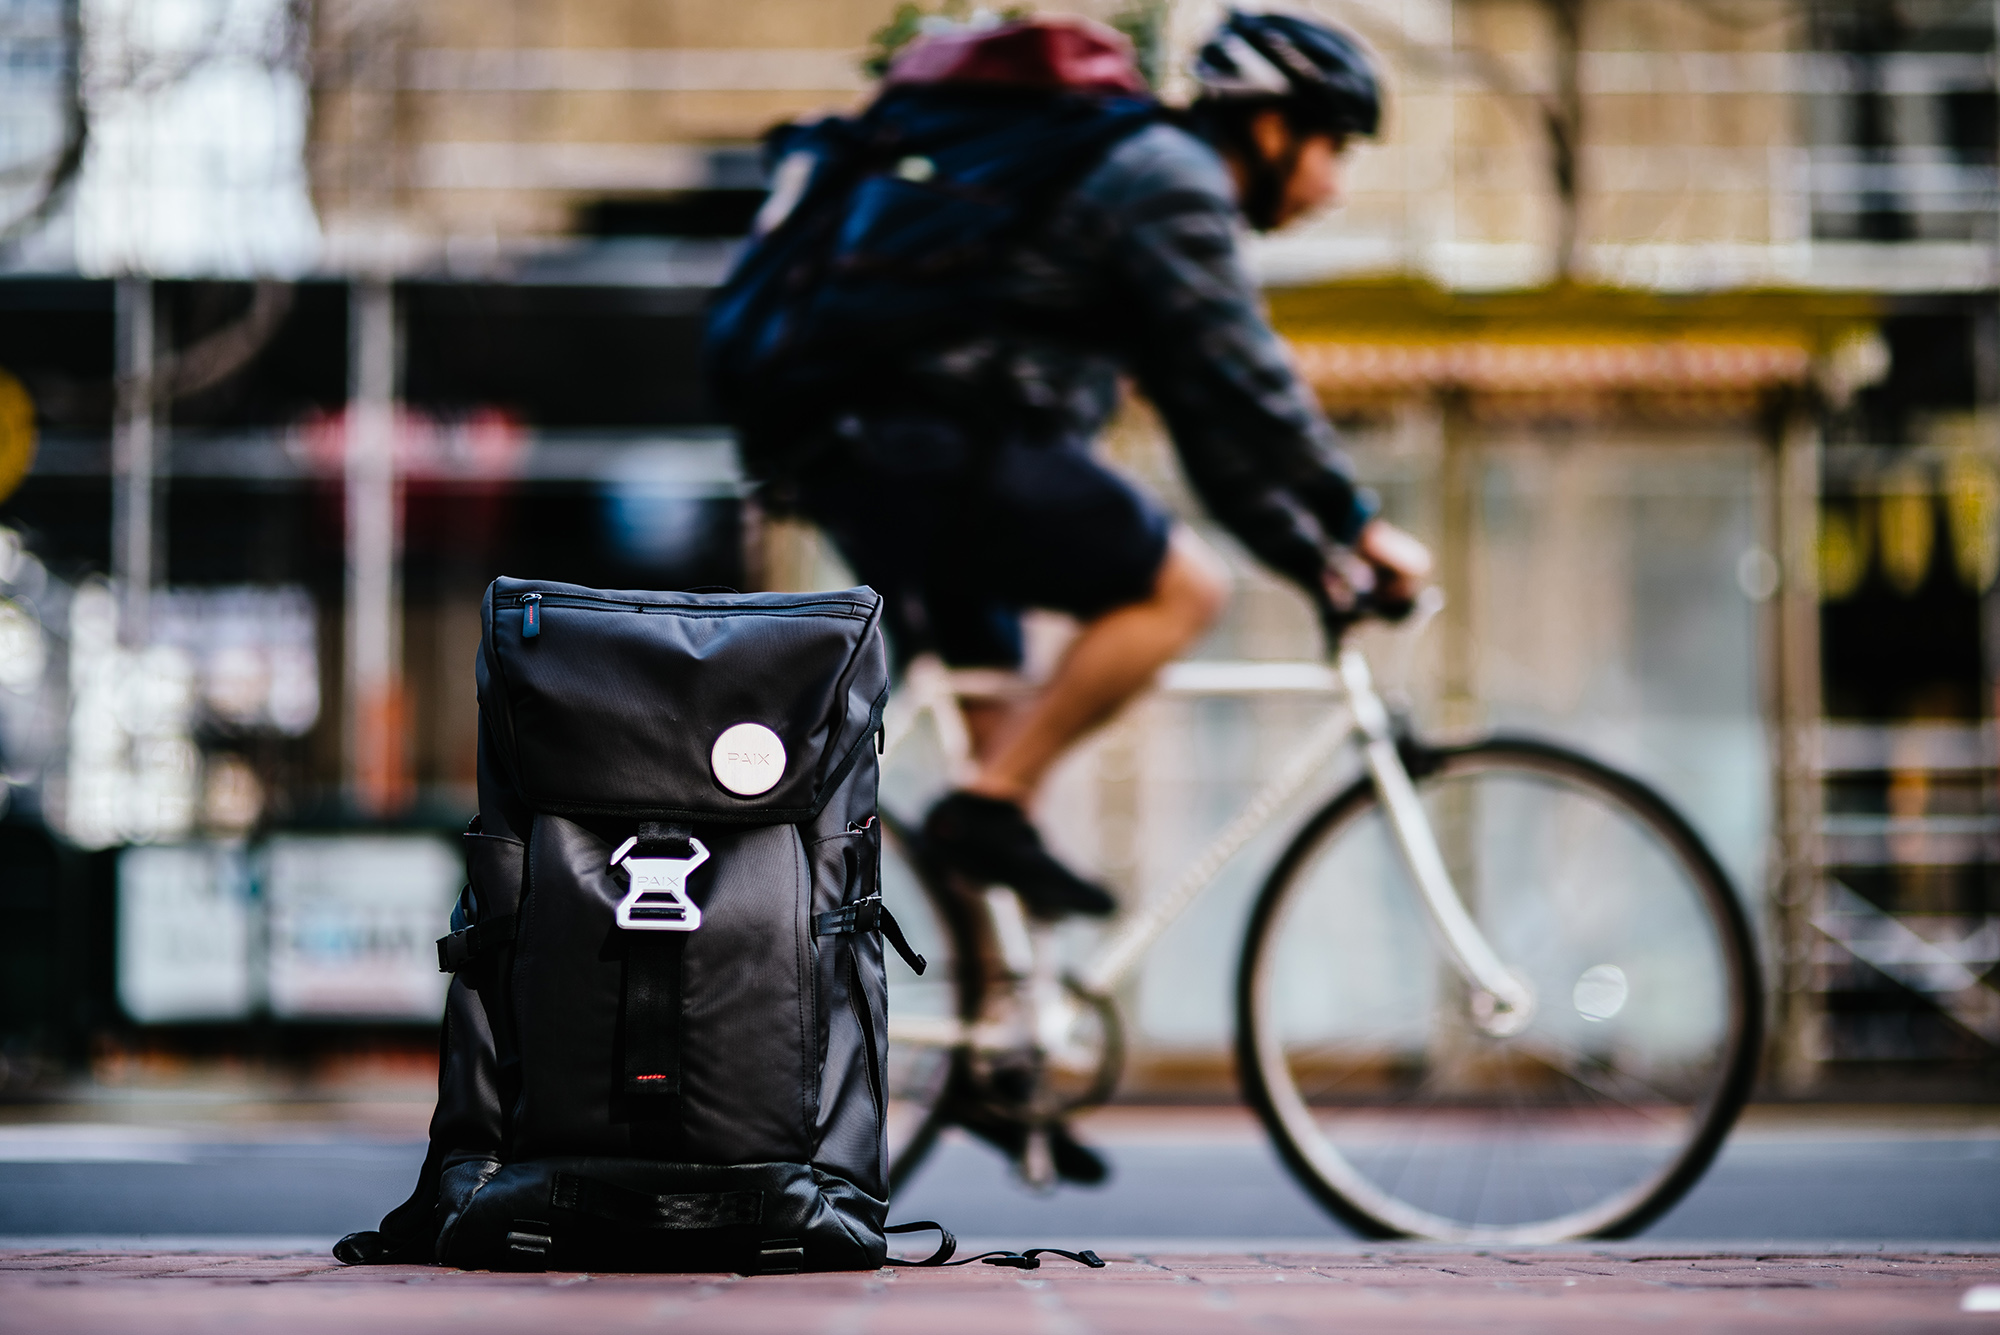 BackPAIX is engineered to make commuting easier for cyclists and those who take public transportation.